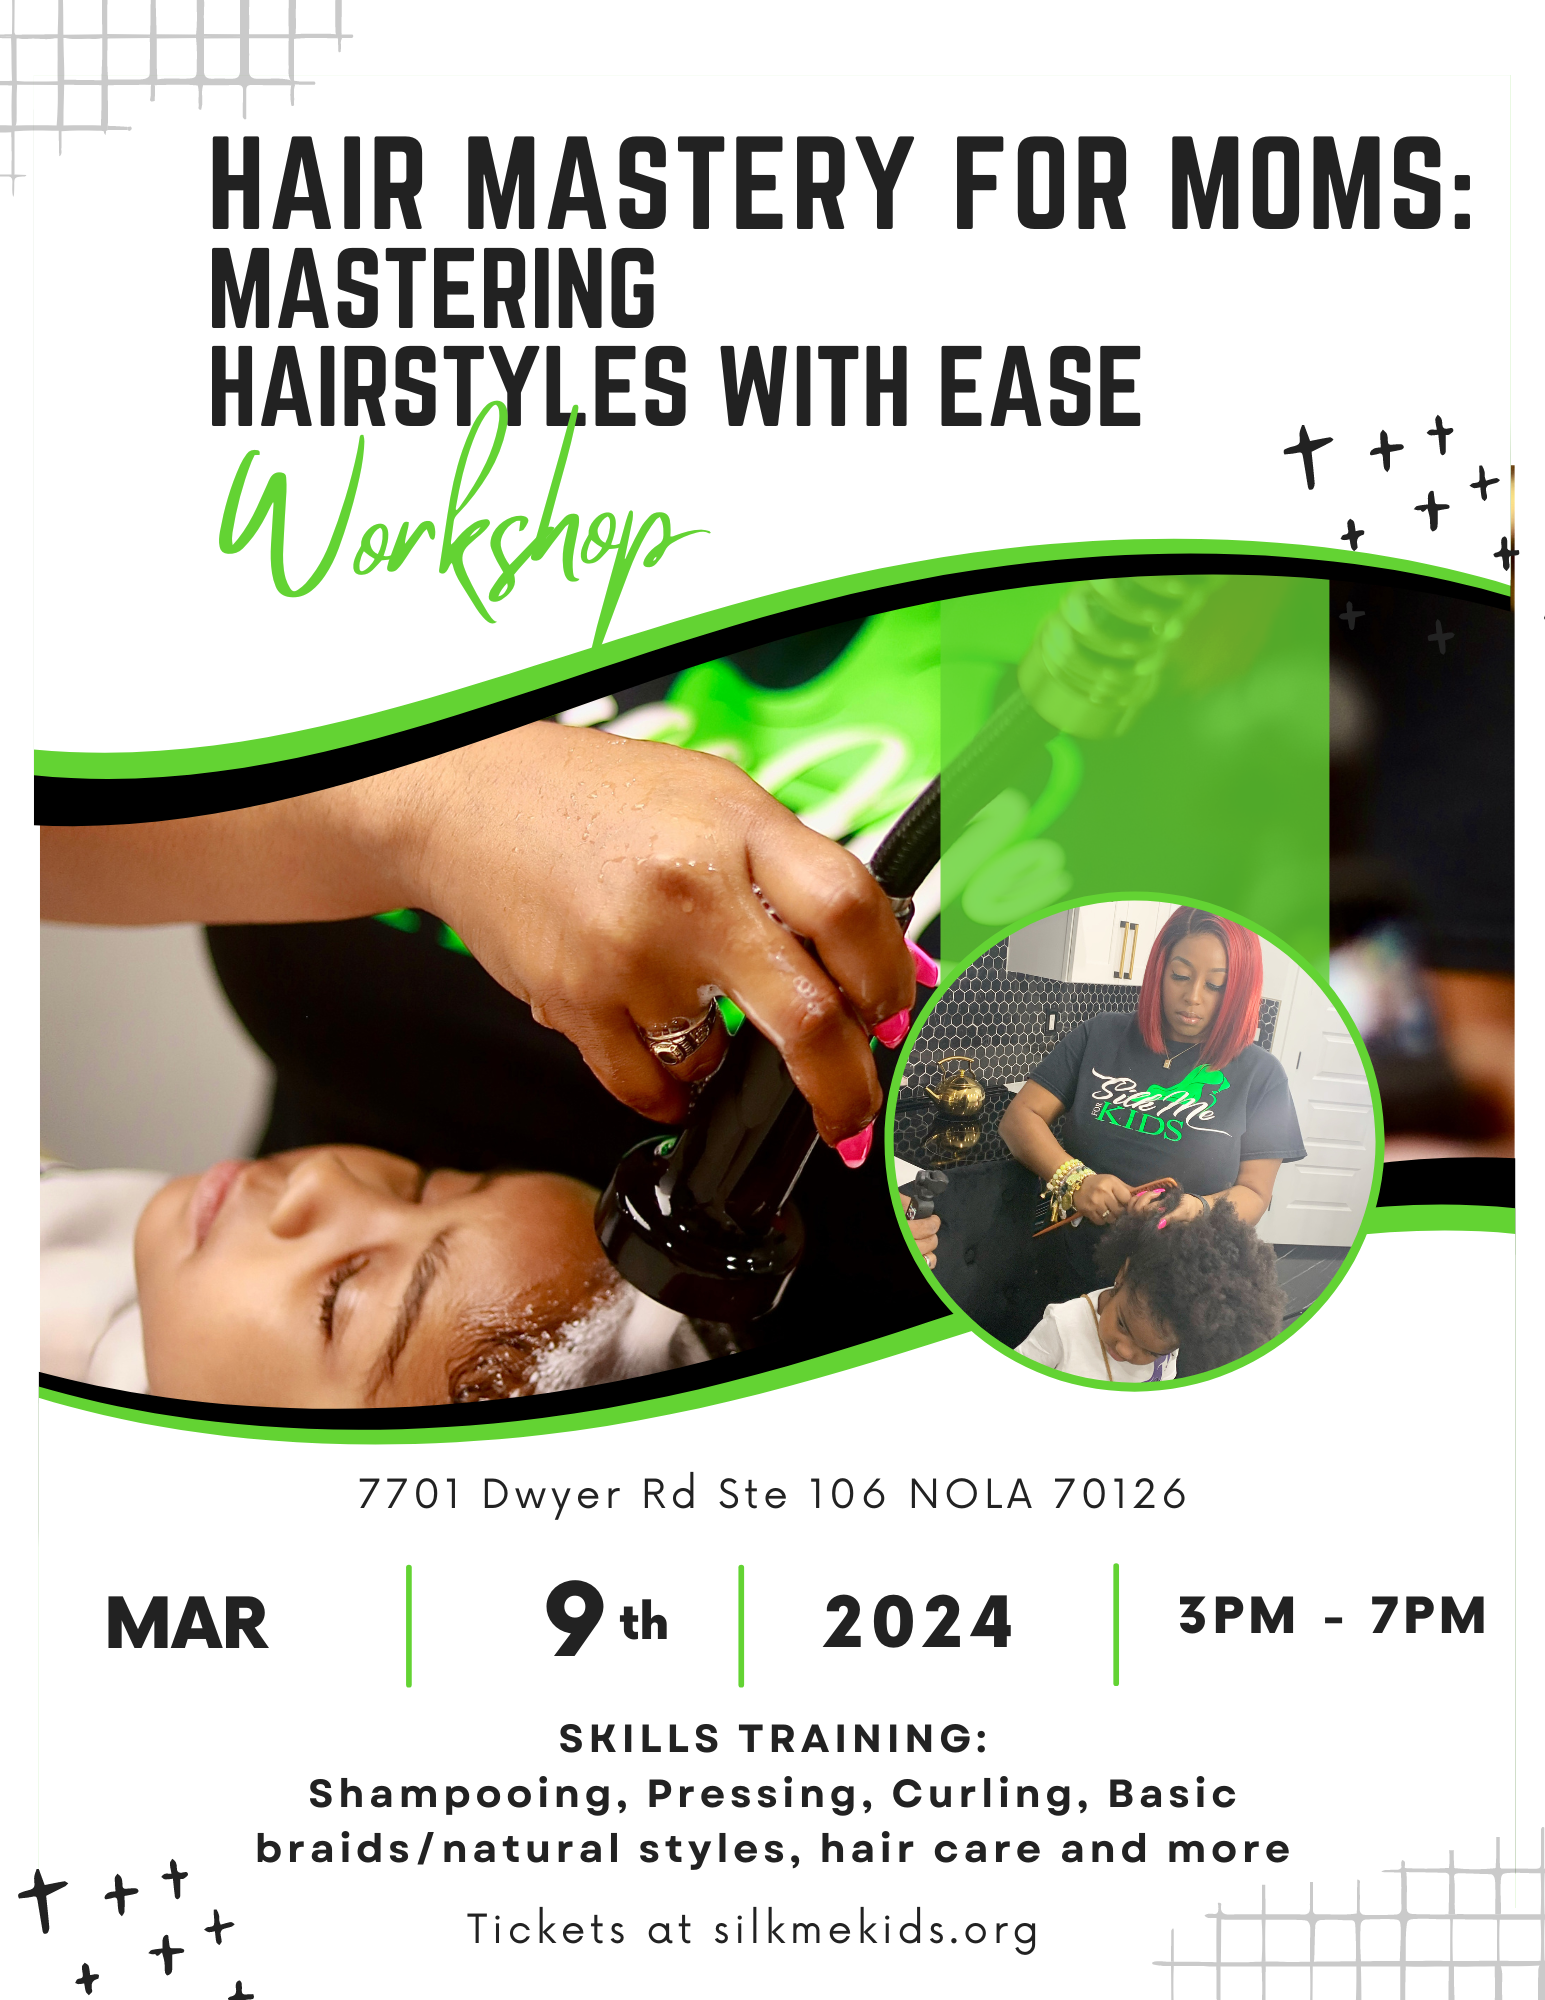 HAIR MASTERY FOR MOMS WORKSHOP